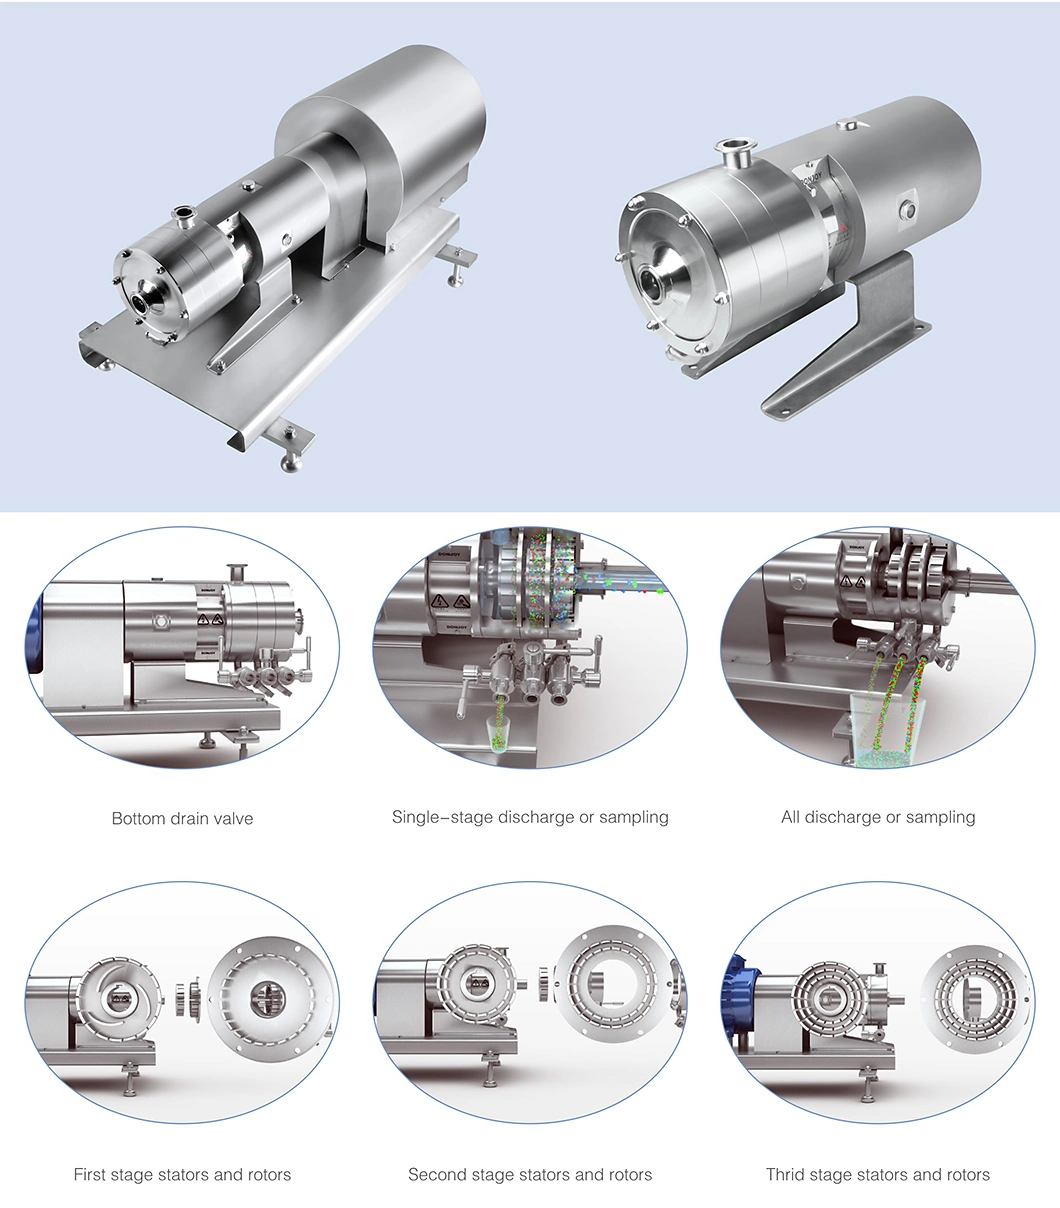 Sanitary Donjoy Emulsified Homogeneous Mixing Pump Manufacturer in China